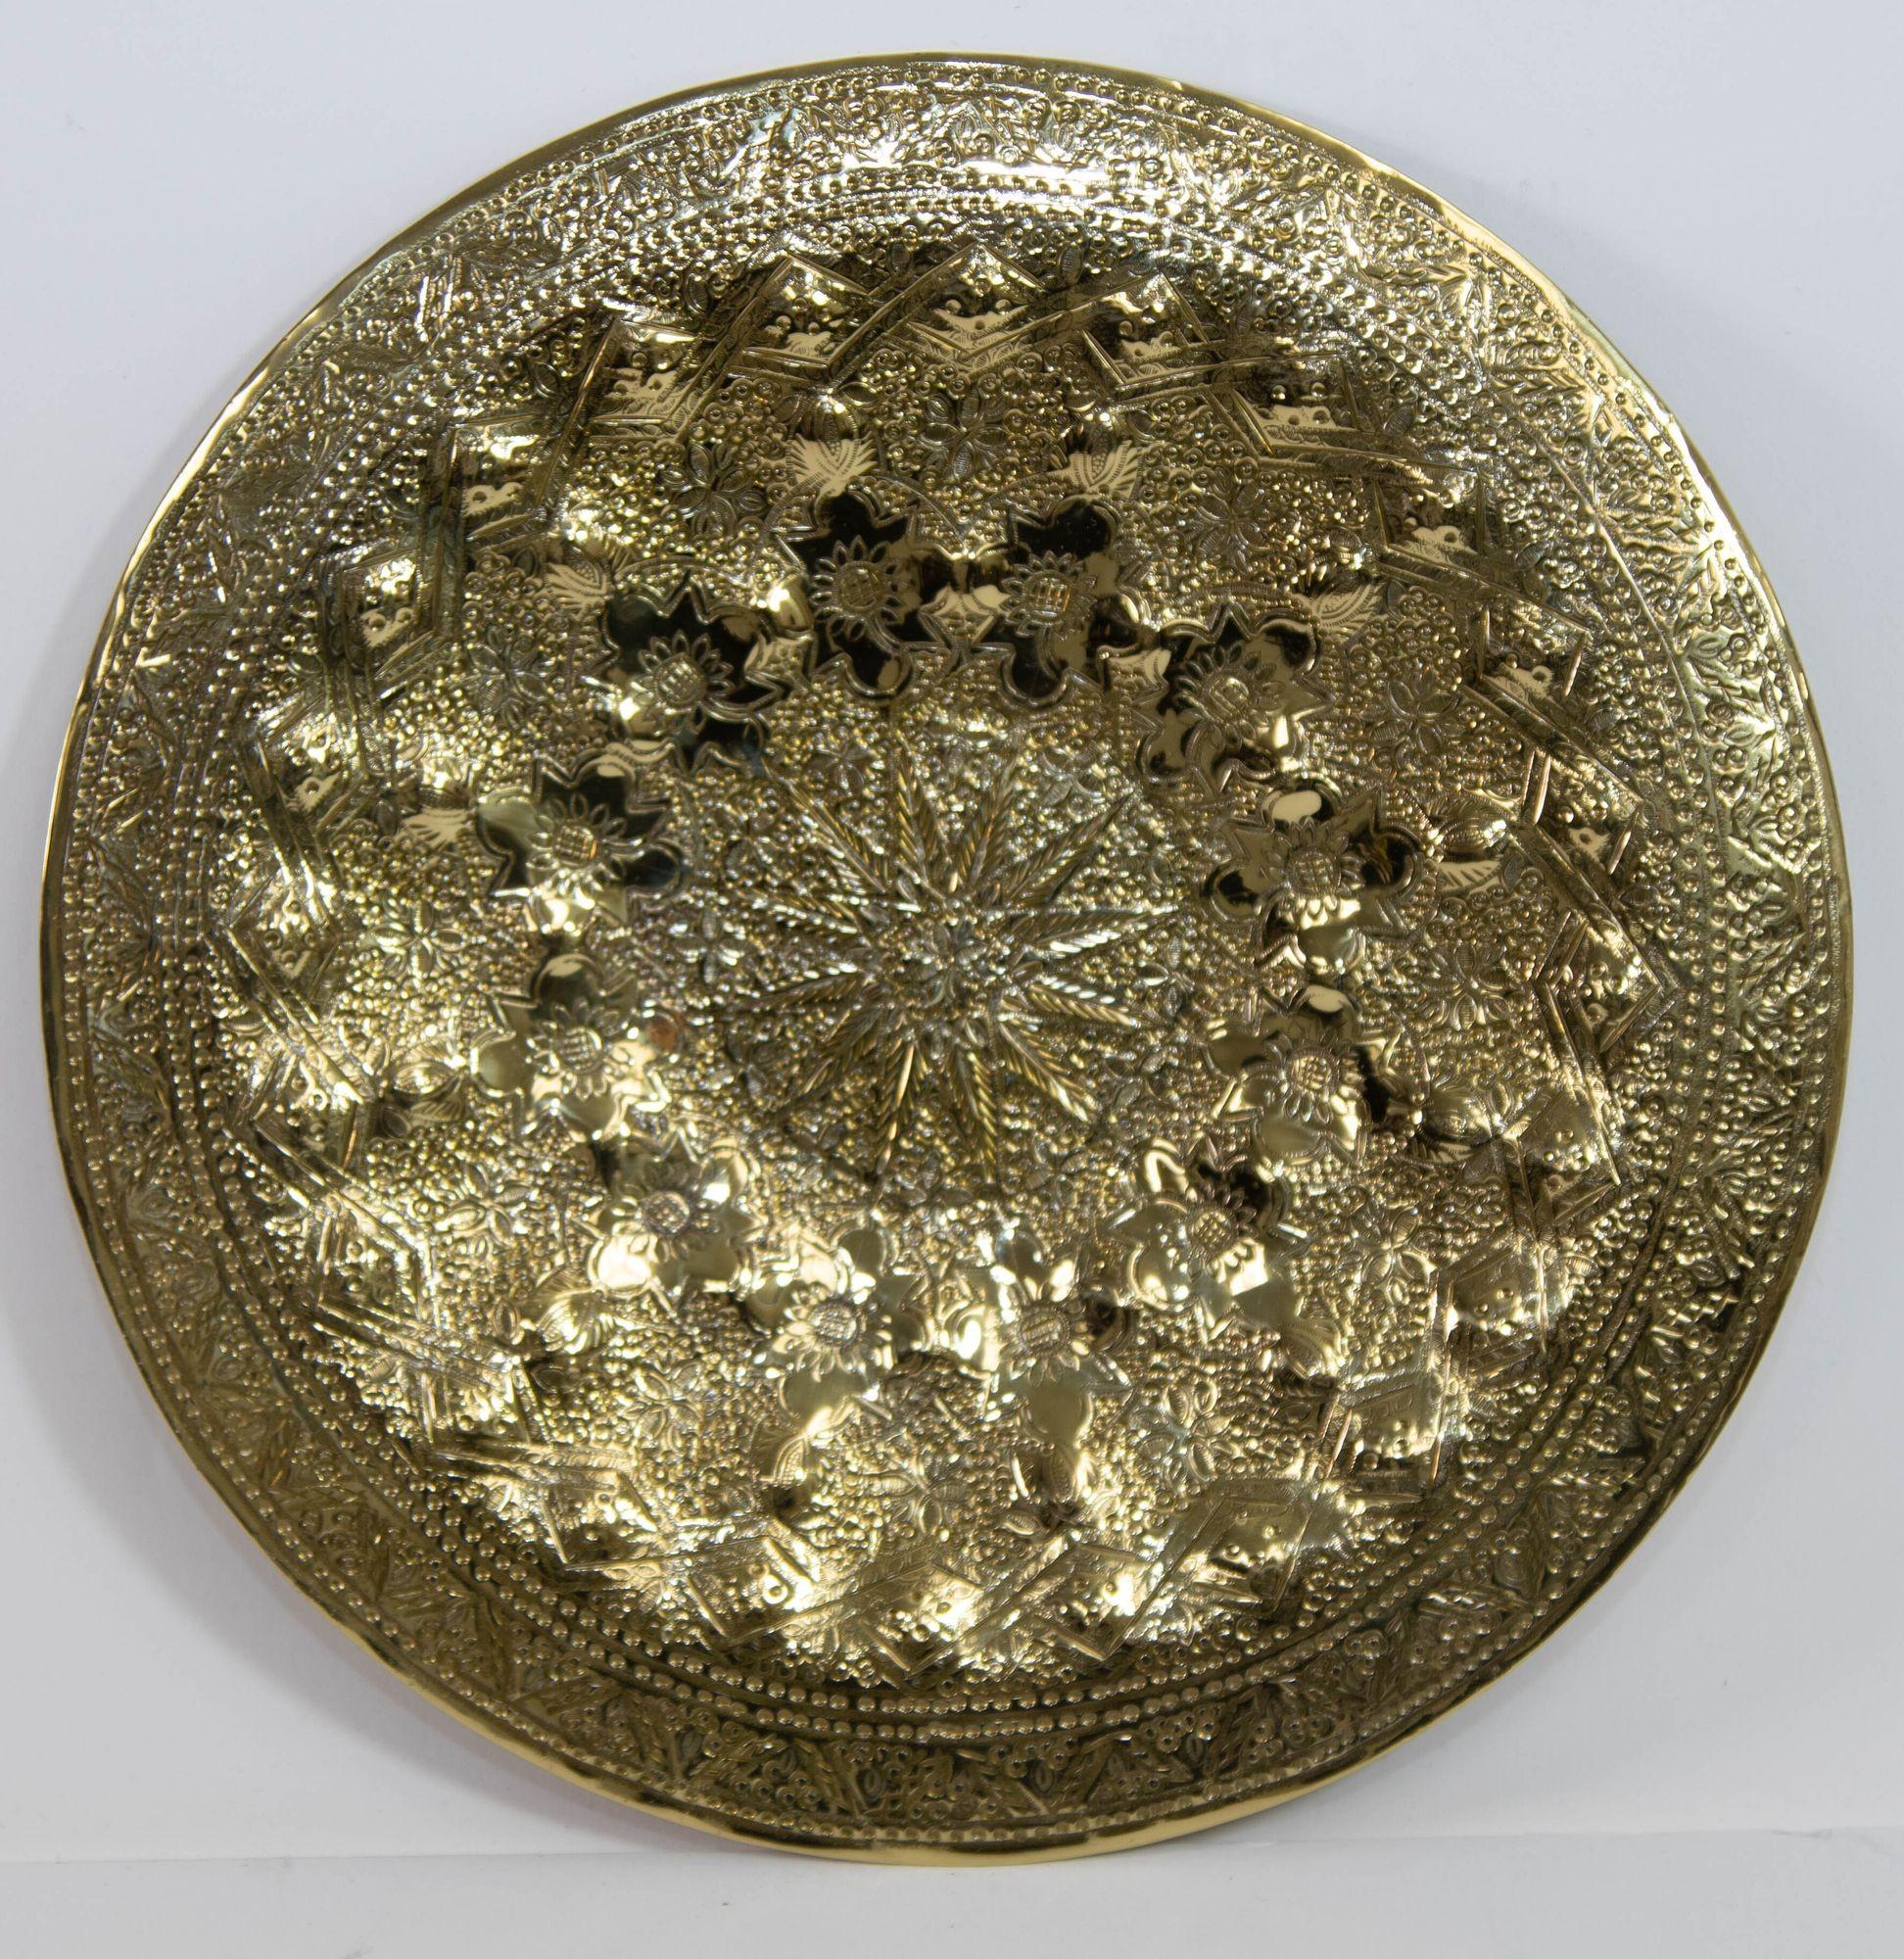 Fine antique circa 1920-1940s Middle Eastern Persian Brass Tray Polished Collectible Islamic Metalwork Platter.
The Islamic polished brass metalwork, antique brass tray is a remarkable piece of artistry that embodies the rich cultural heritage and